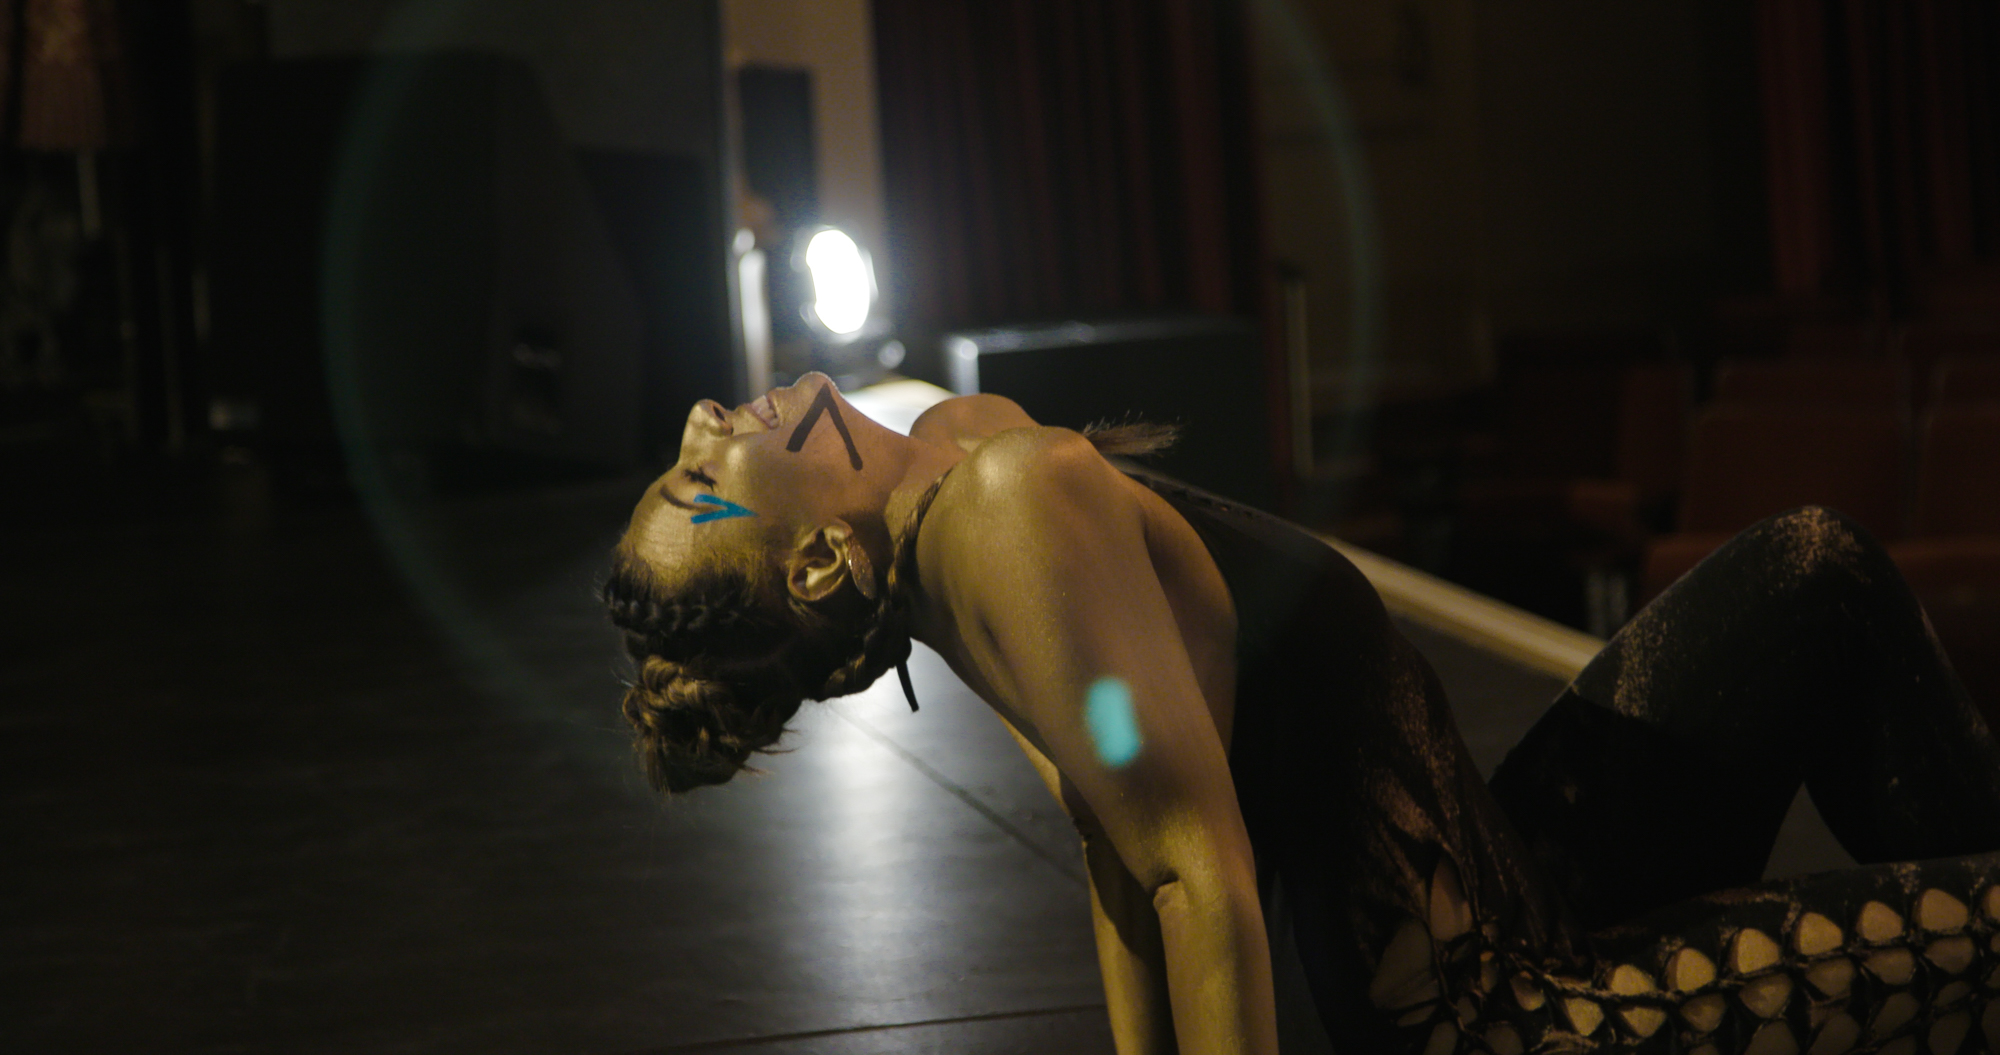 Behind the scenes during the filming of "Fire Together", a documentary featuring the worlds best dancers and performers